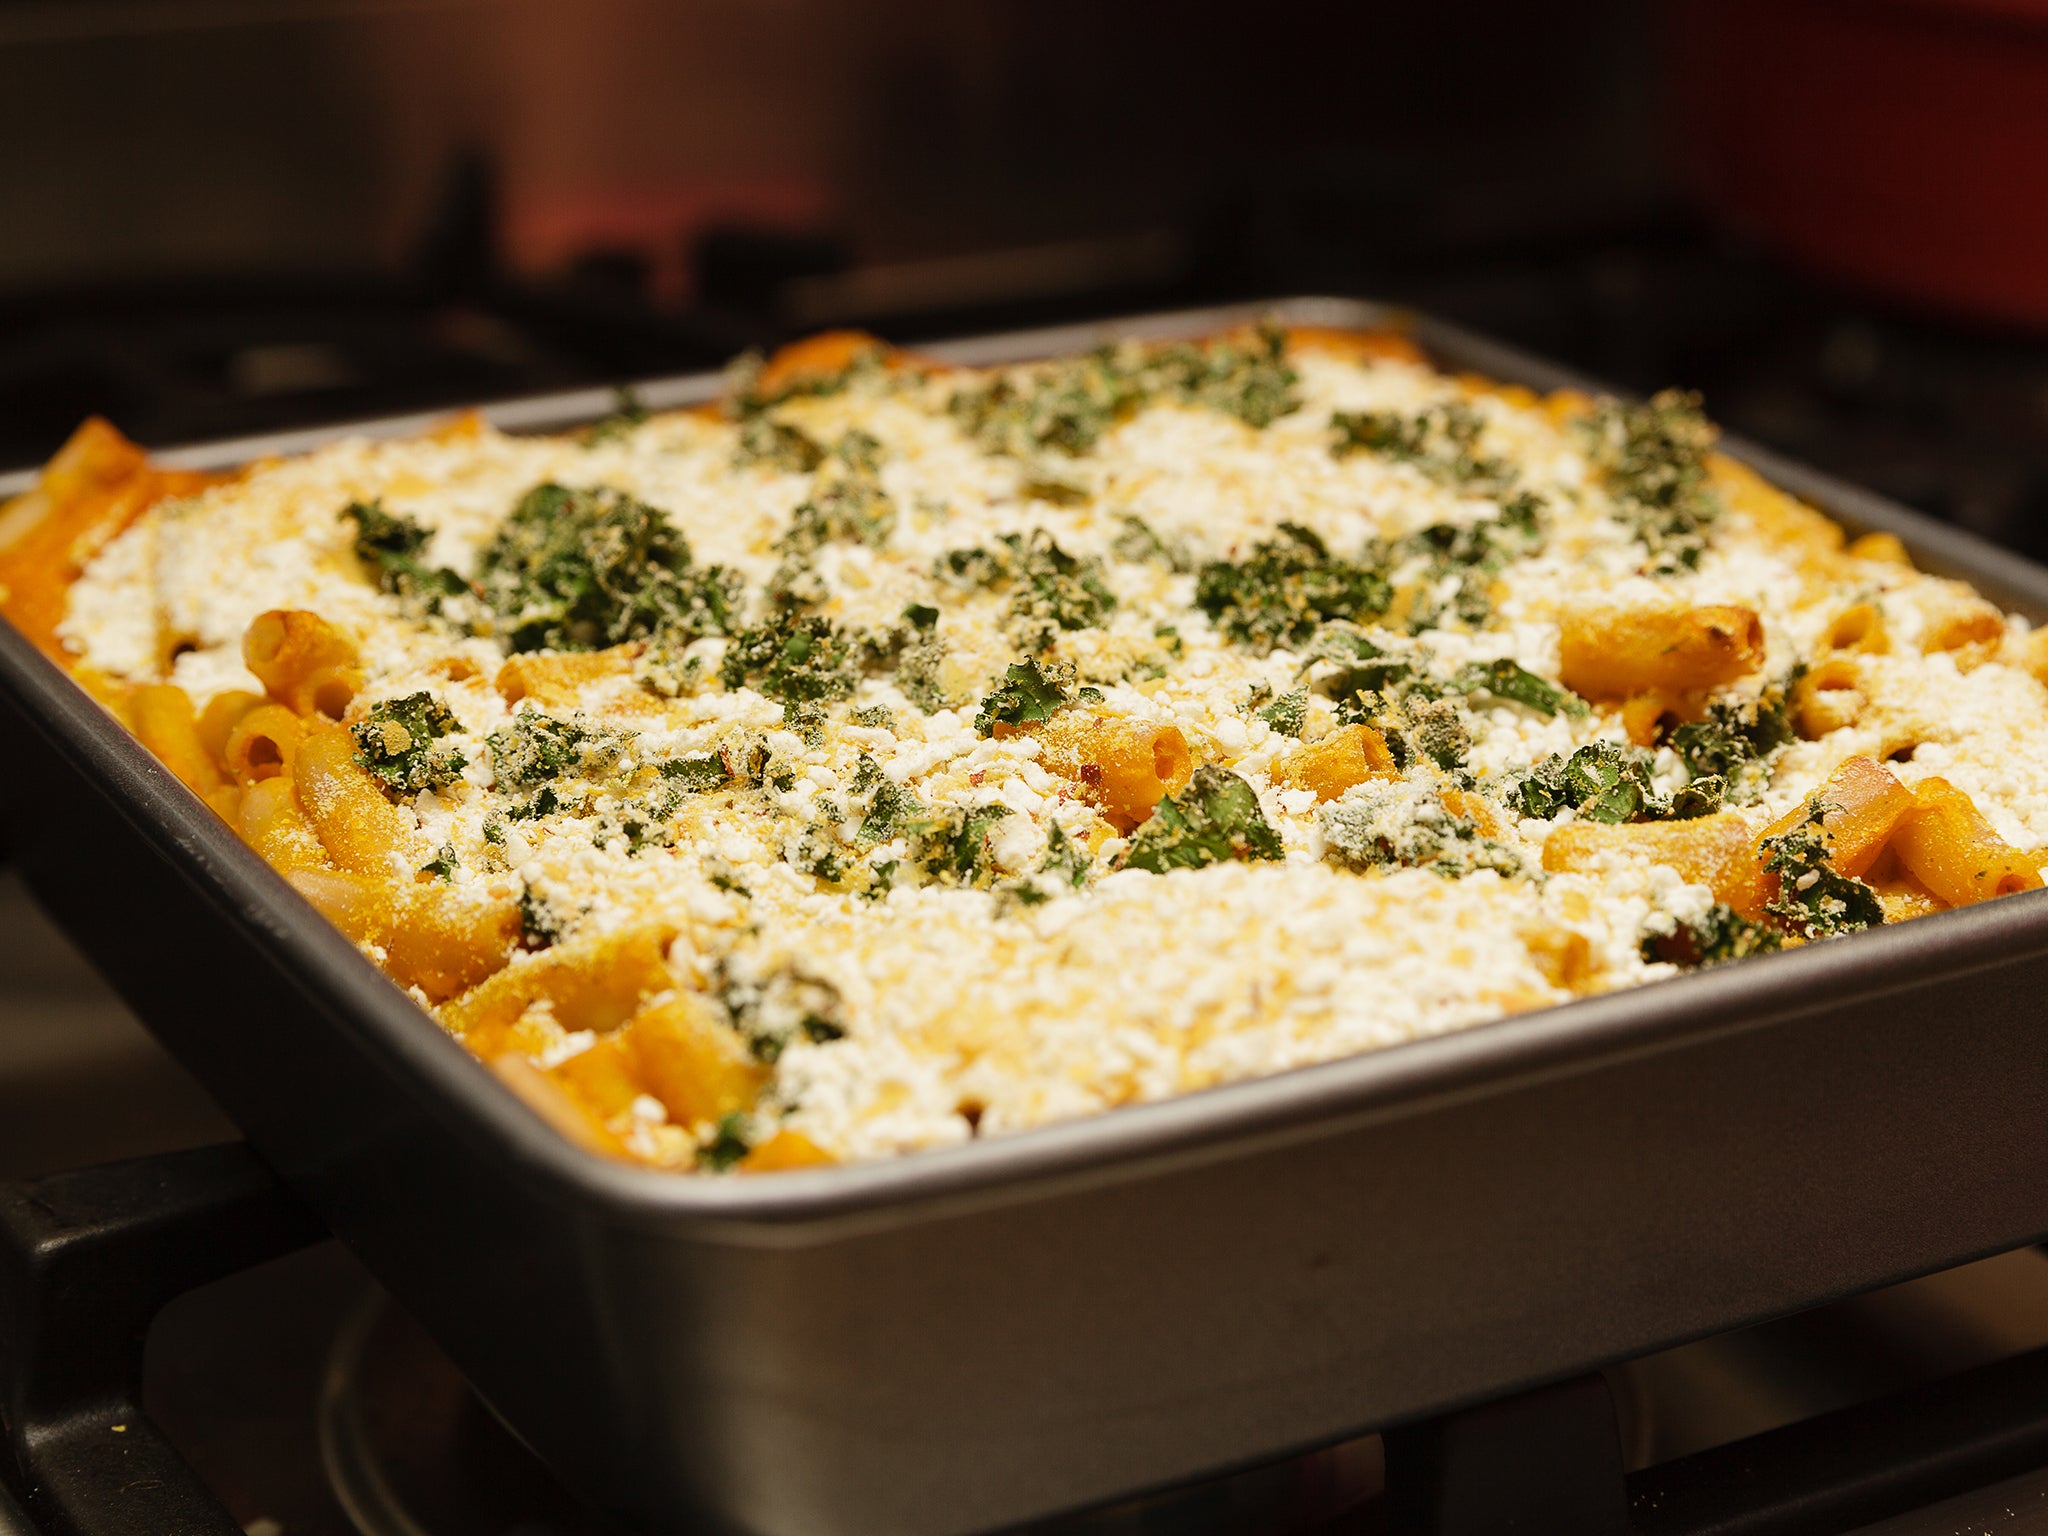 This baked pasta is inspired by spanakopita, the classic Greek spinach and feta pie